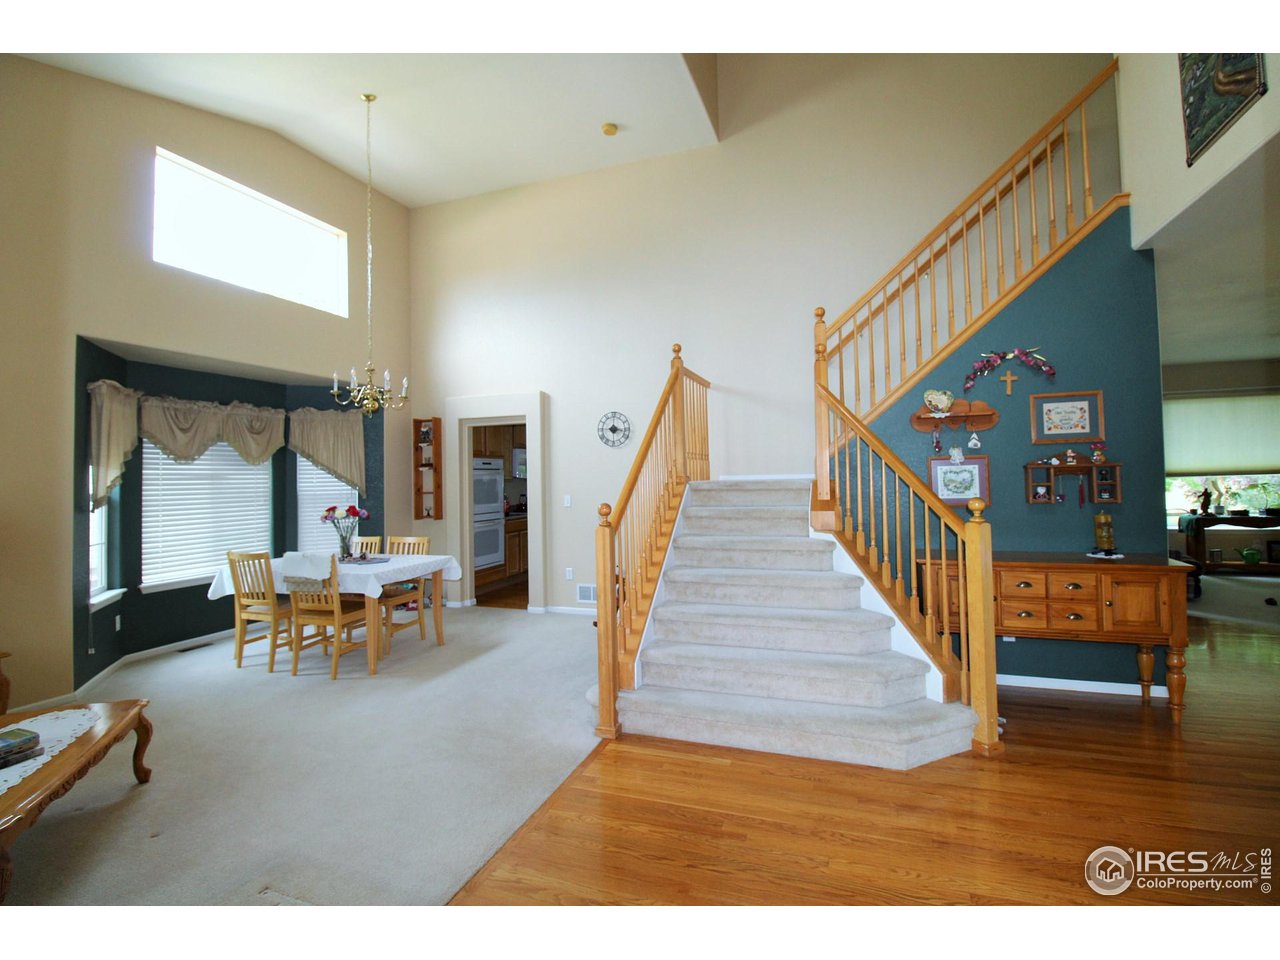 2-story entry with wood floors, open rail system for a bright open feeling.